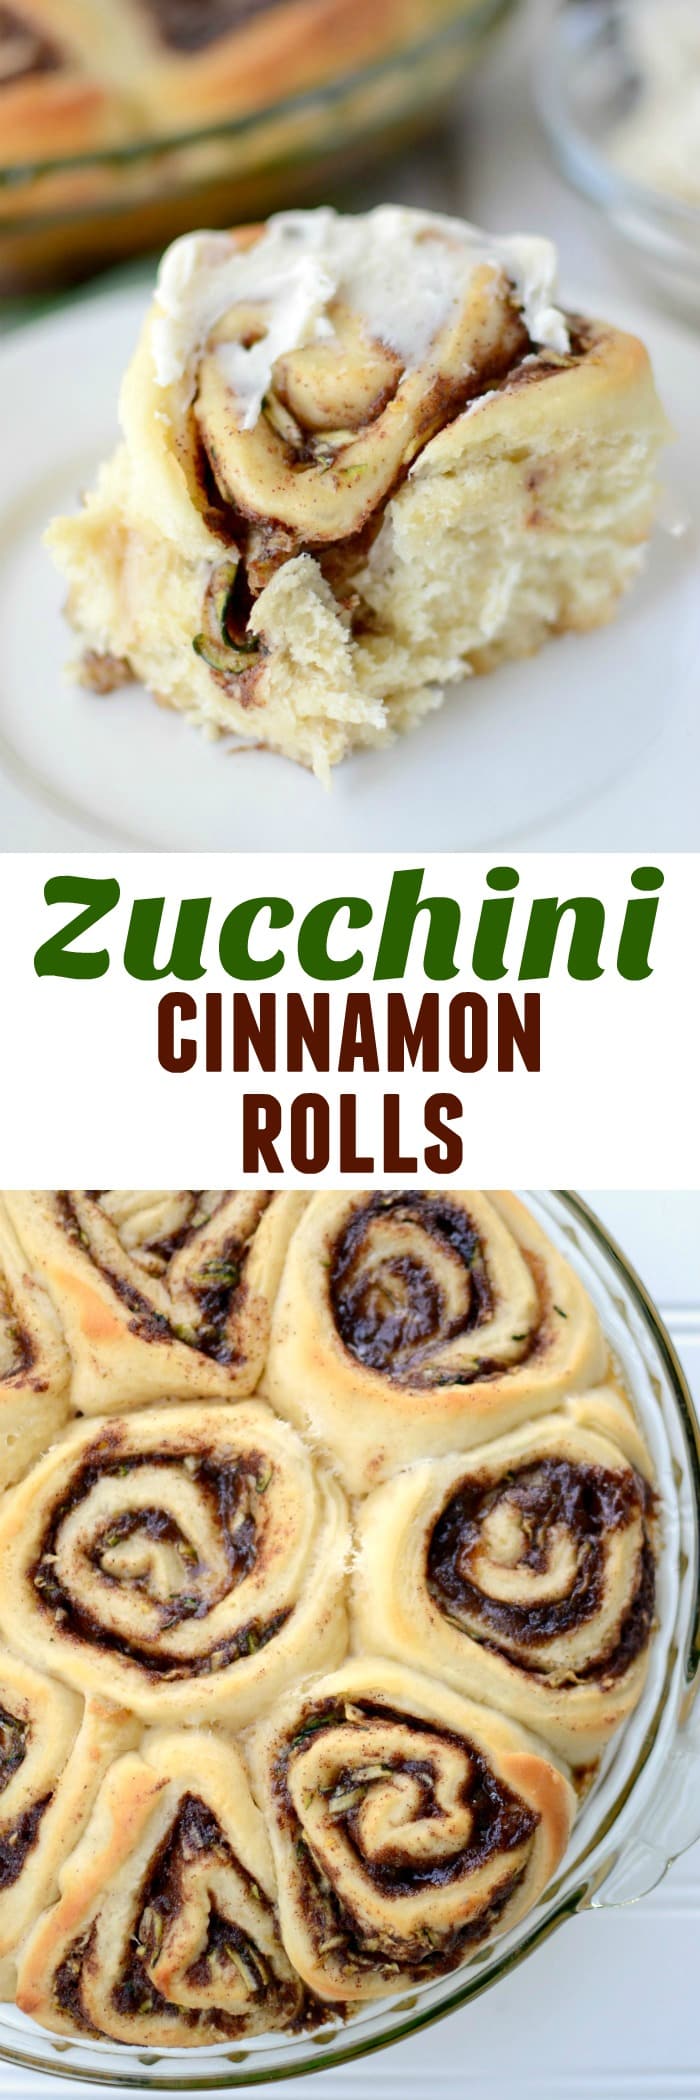 Zucchini Cinnamon Rolls - this is the BEST cinnamon roll dough filled with shredded zucchini and tons of cinnamon. Sneak in a little vegetable and I promise the kids won't even know it.